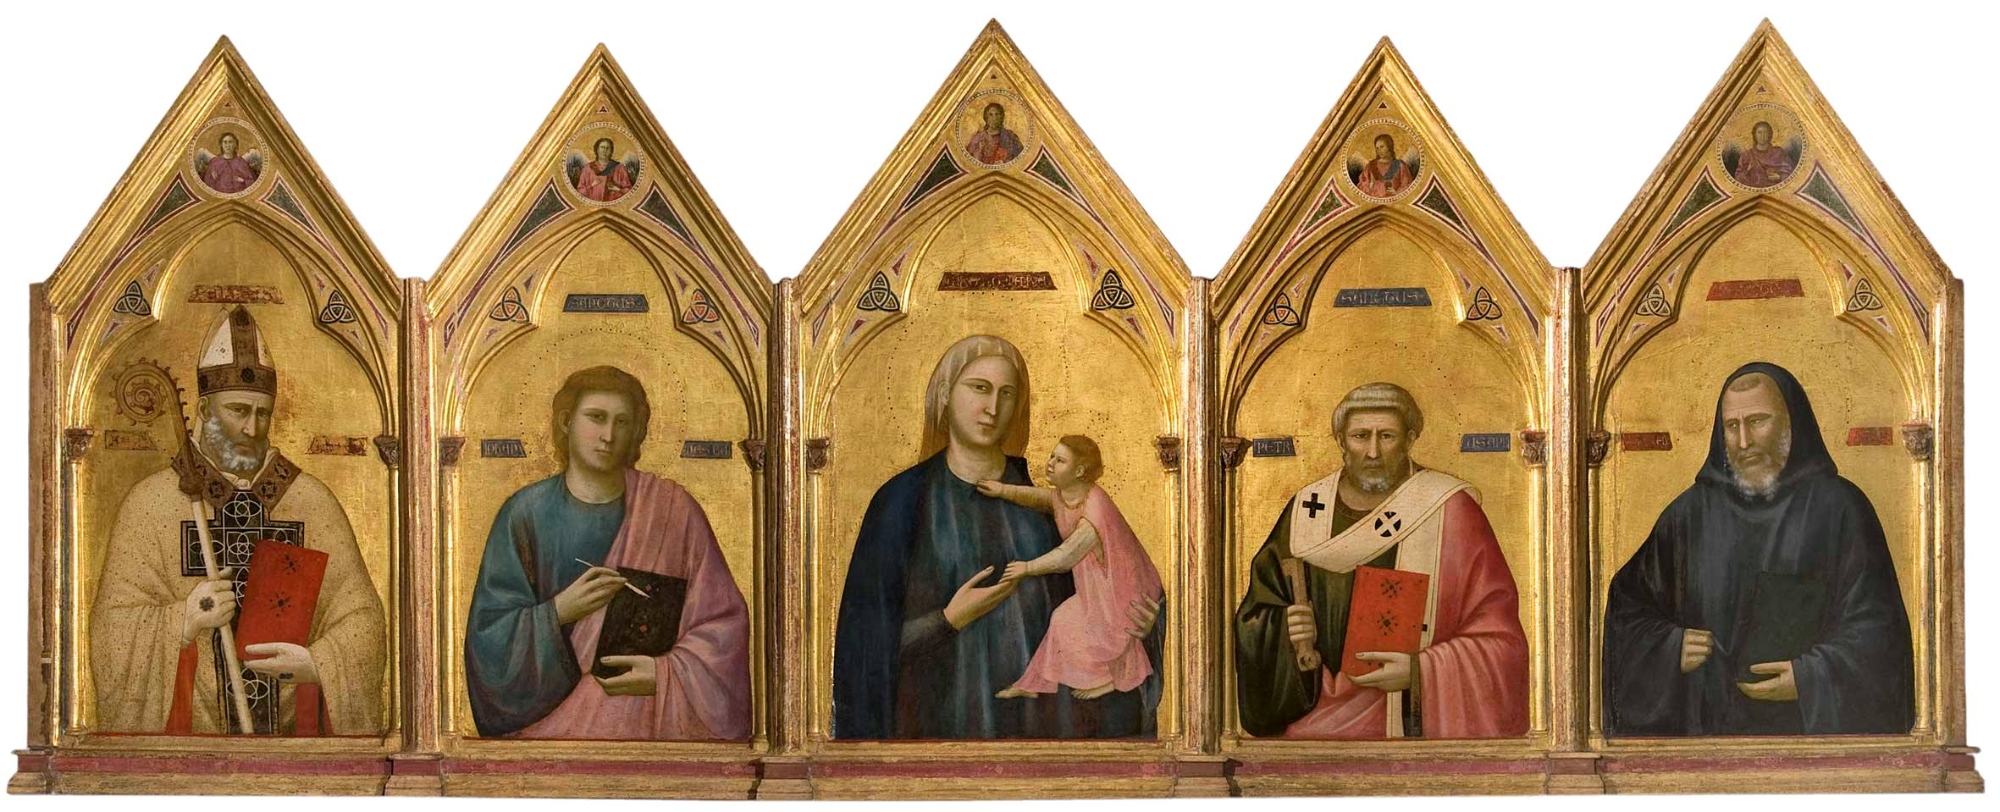 Giotto: life, art and curiosities | Visit Tuscany